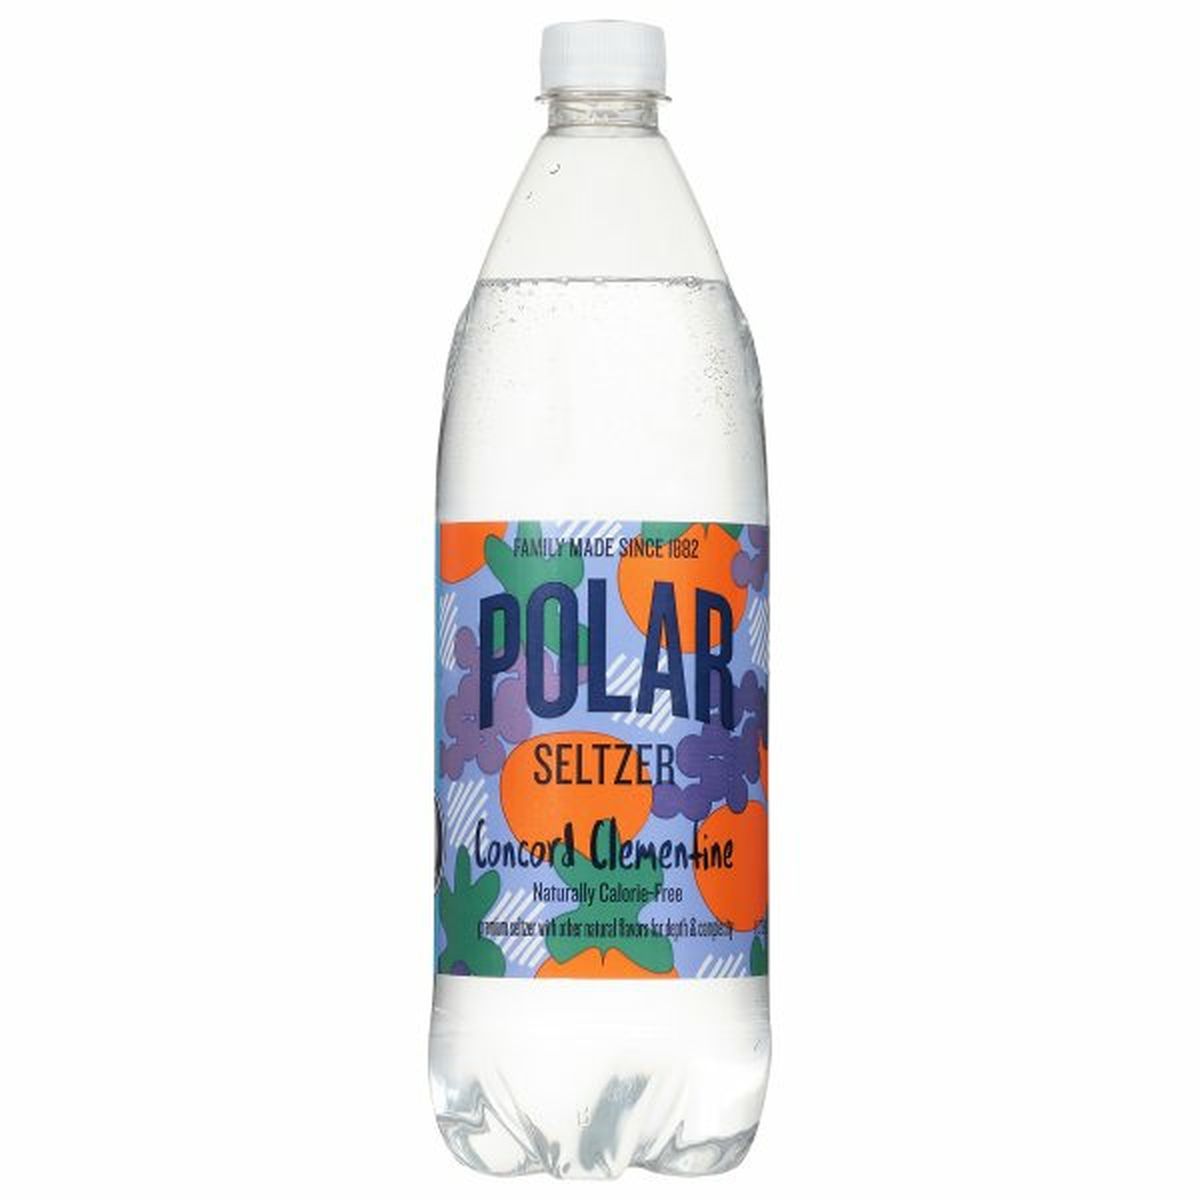 Calories in Polar Seltzer, Concord Clementine, Winter